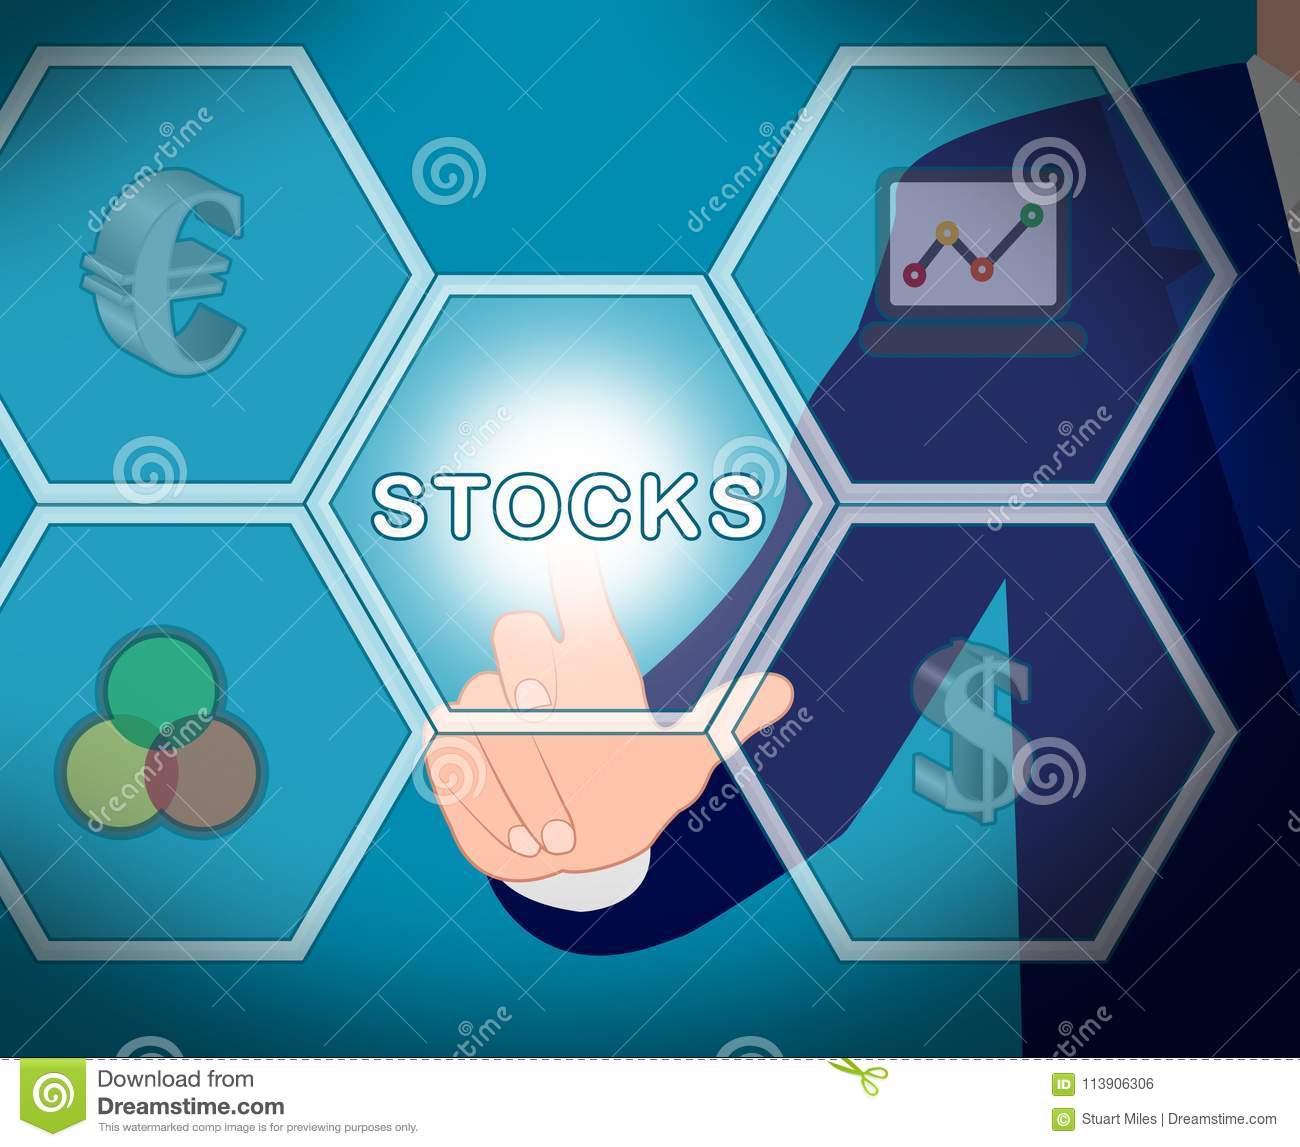 Stocks Icons Meaning Internet Investing 3d Illustration Stock ...